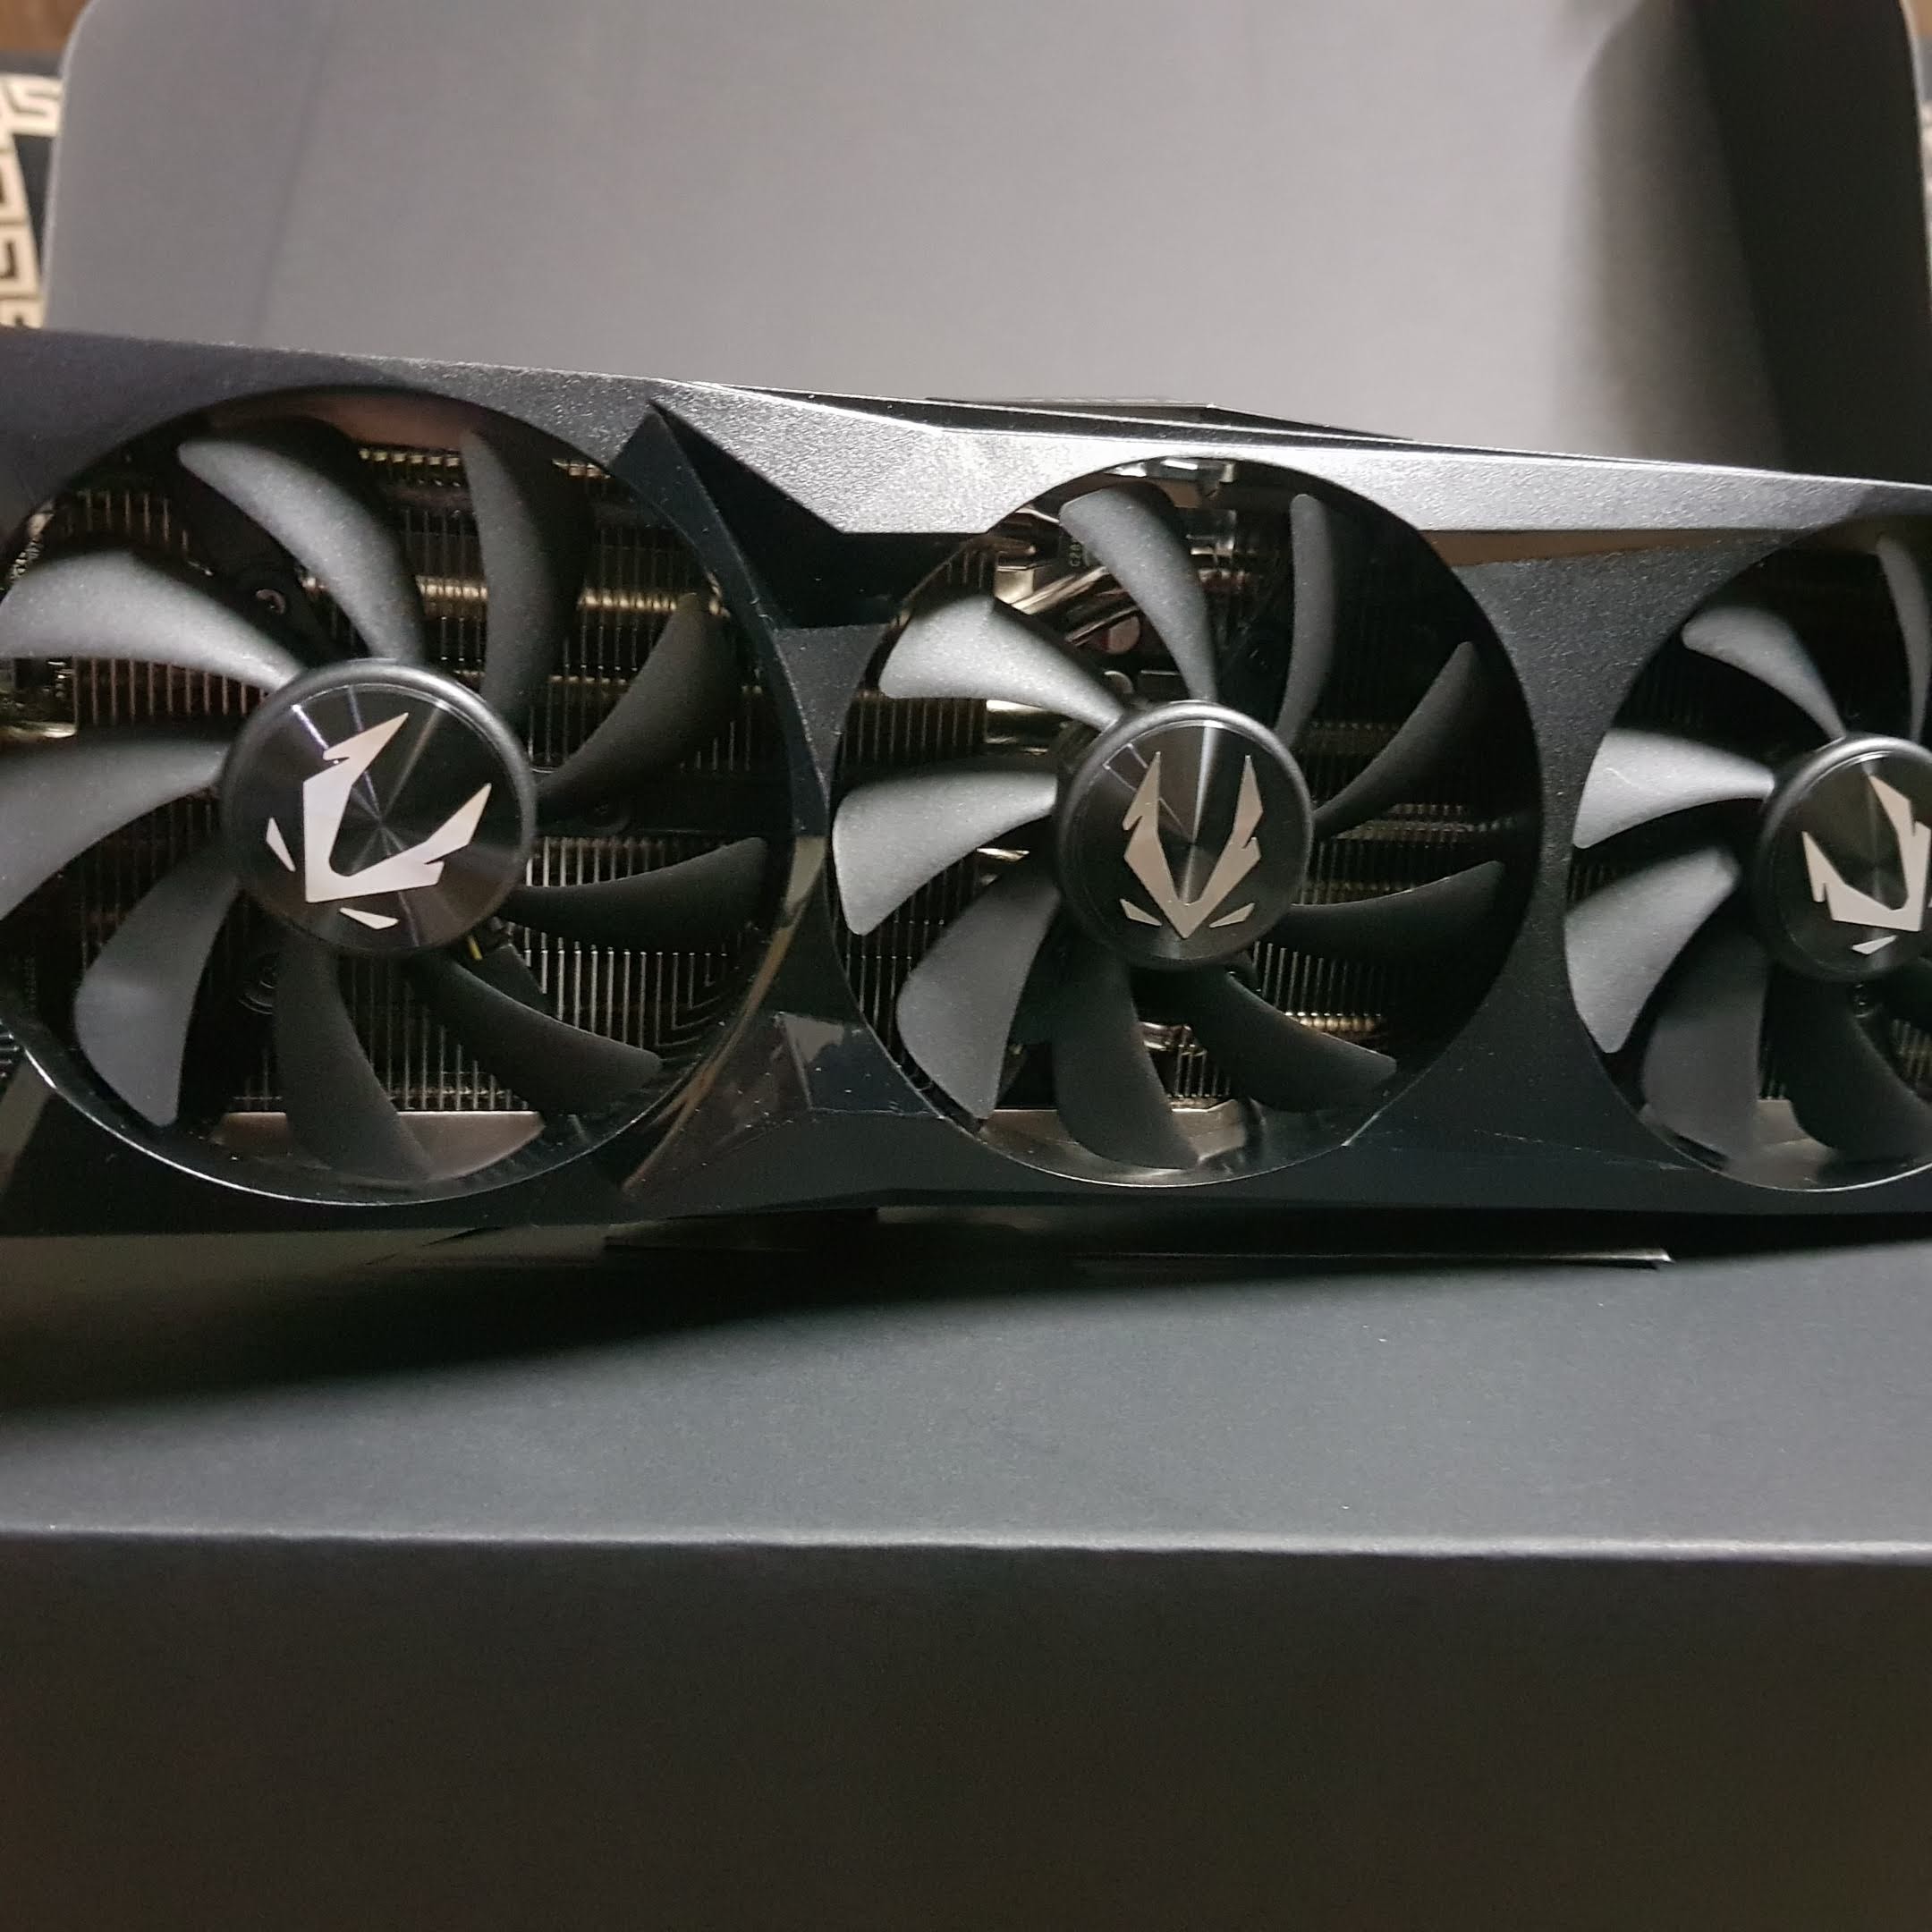 Zotac RTX 2060 Super AMP Extreme Review | Gaming PC Builder